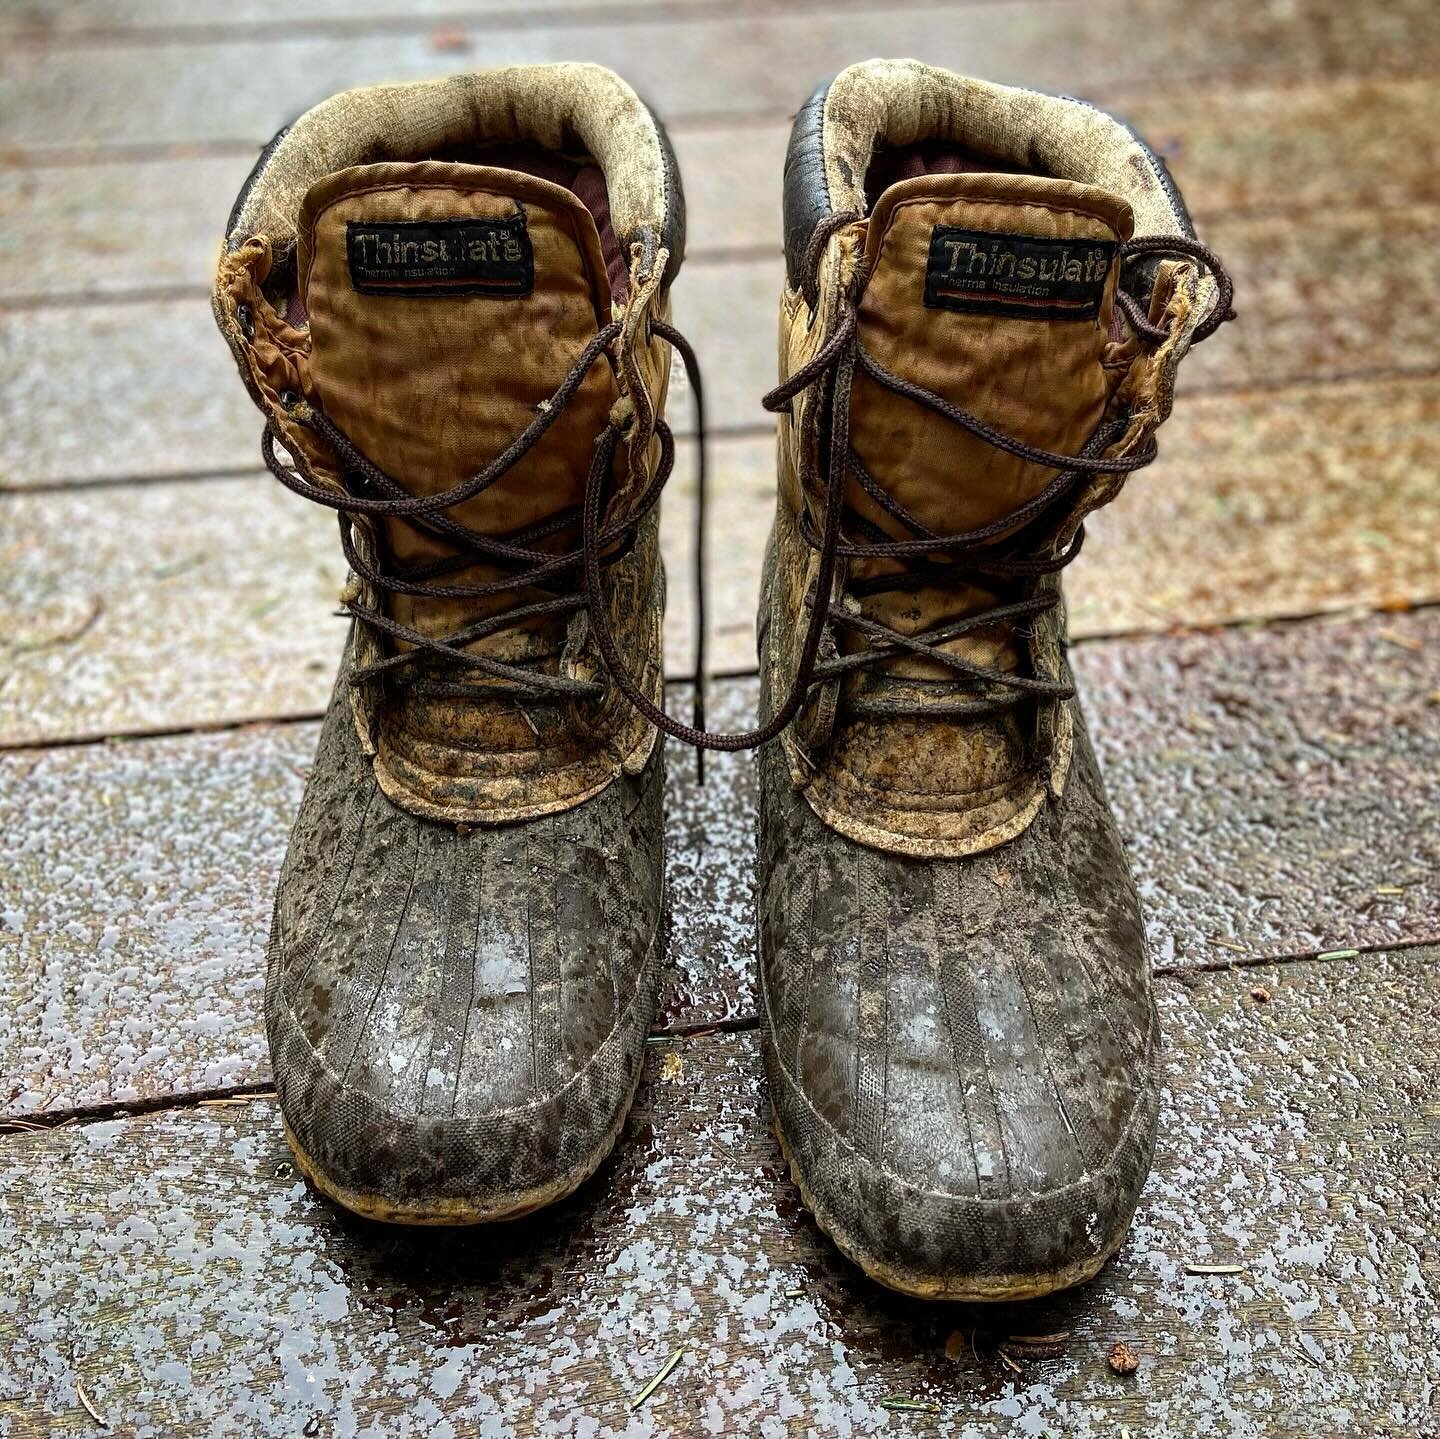 Squirrel ate my boots! We&rsquo;ve been clearing the shed and getting the house ready for guests. Went to fetch my trusty duck boots, bought in New Jersey over 20 years ago. 

I thought they felt a bit heavy. Discovered one of our woodland friends ha